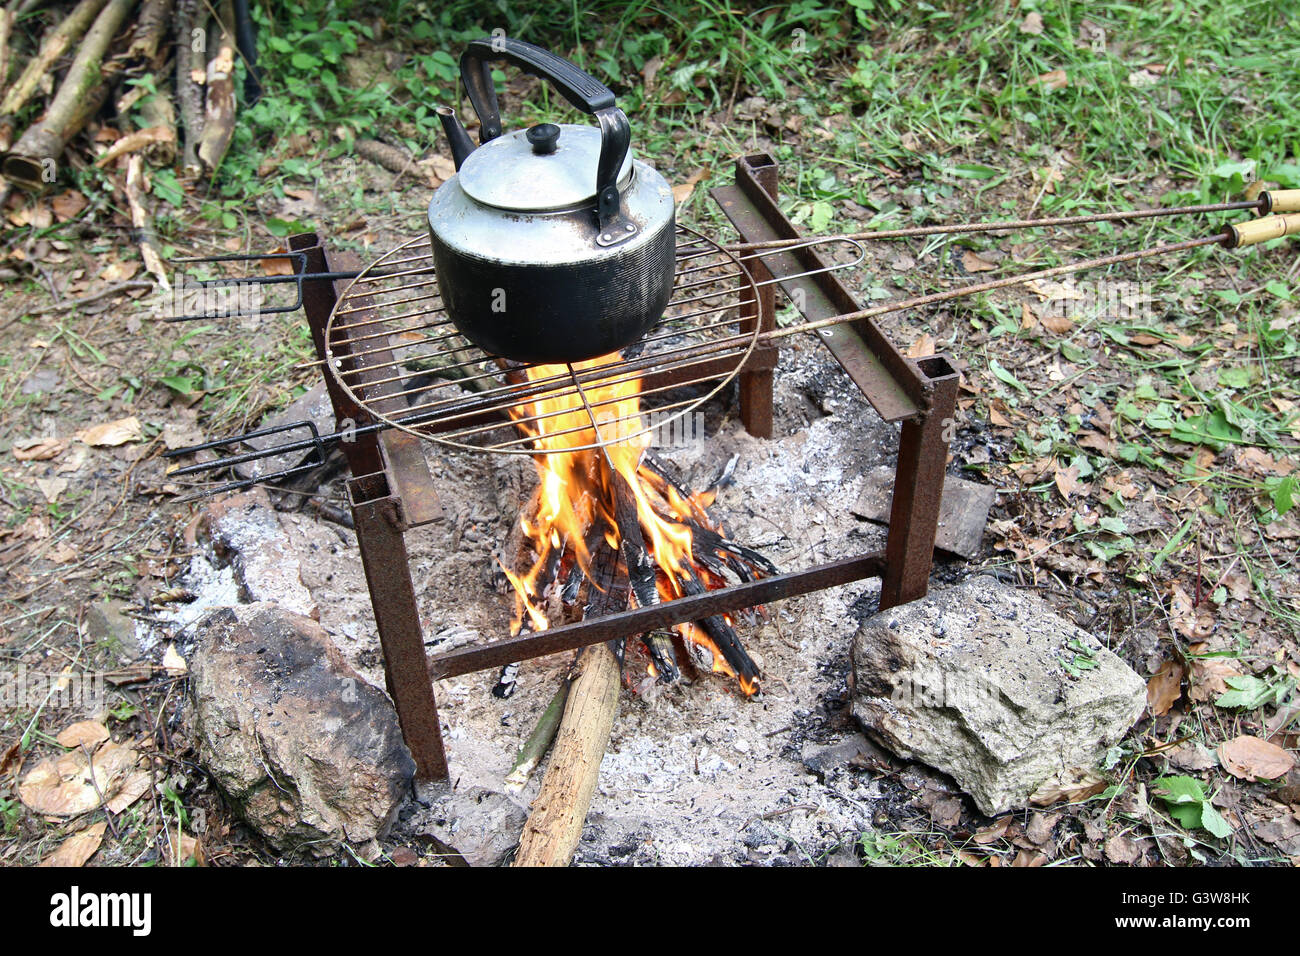 Making tea on the camp fire - teapot on fire Stock Photo